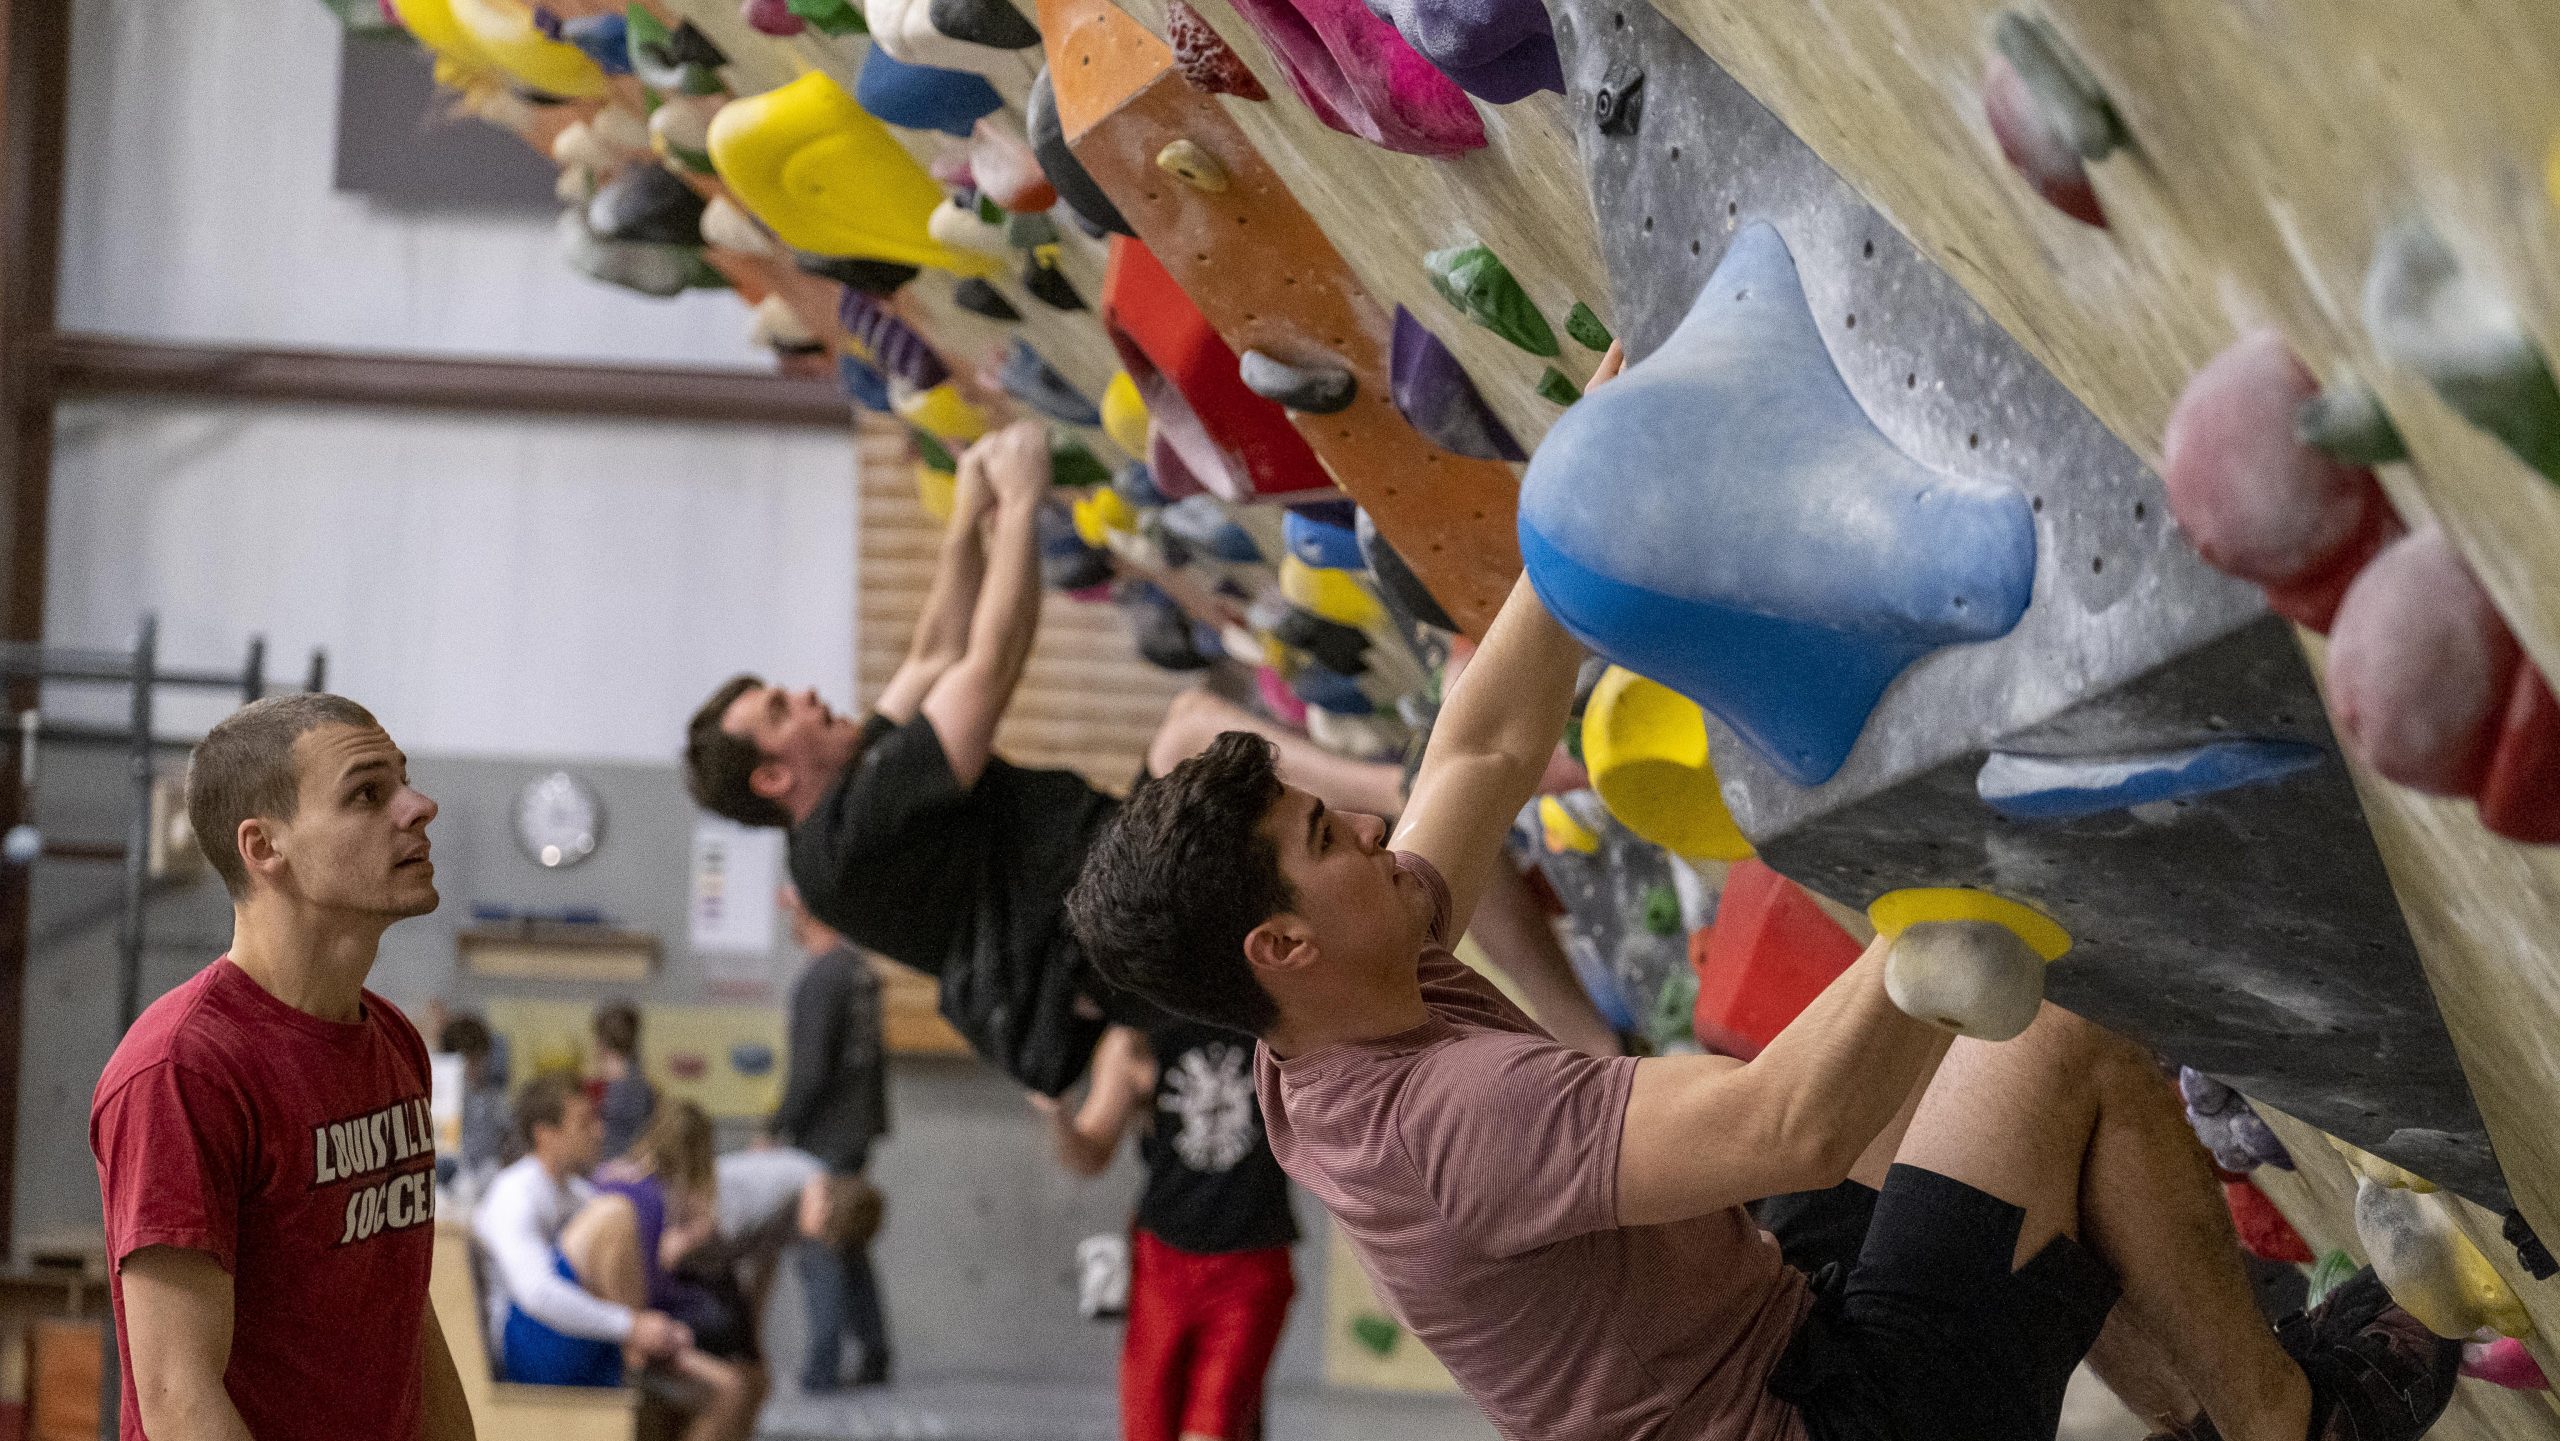 climbers bouldering together